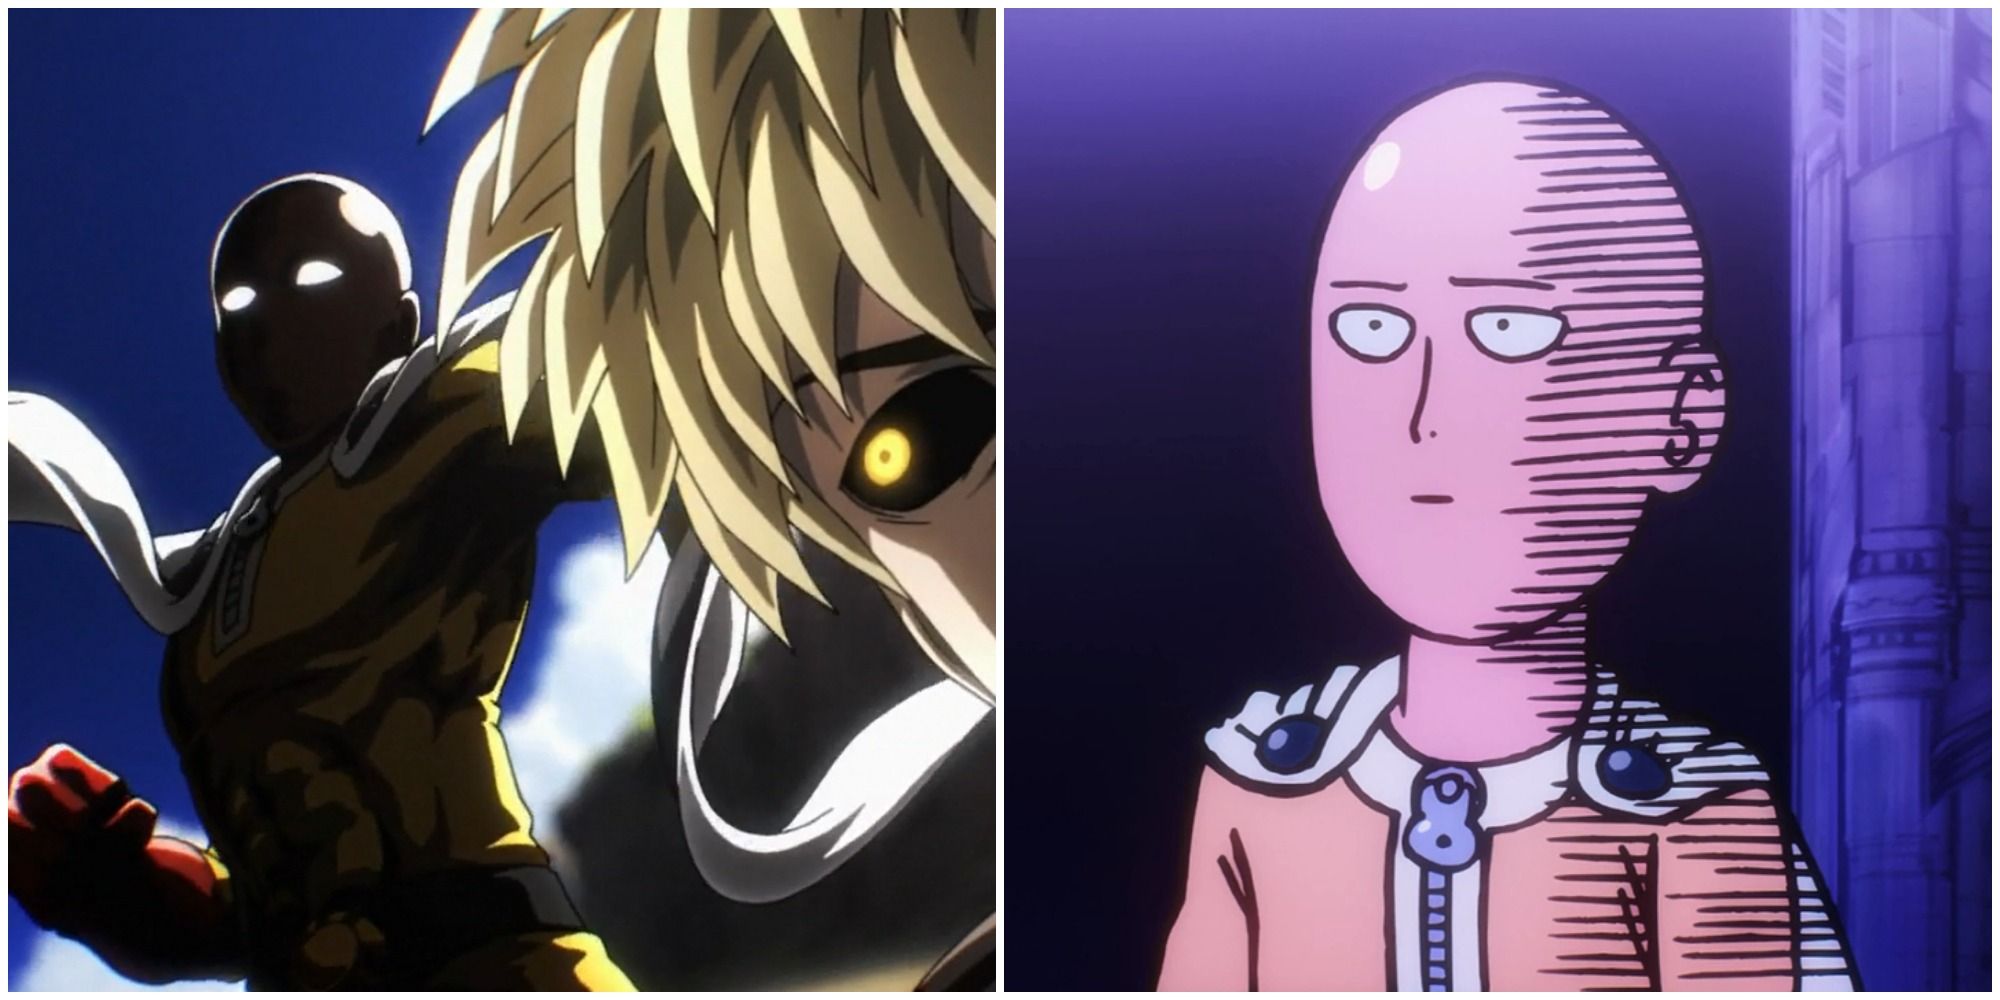 10 most engaging fights in One Punch Man